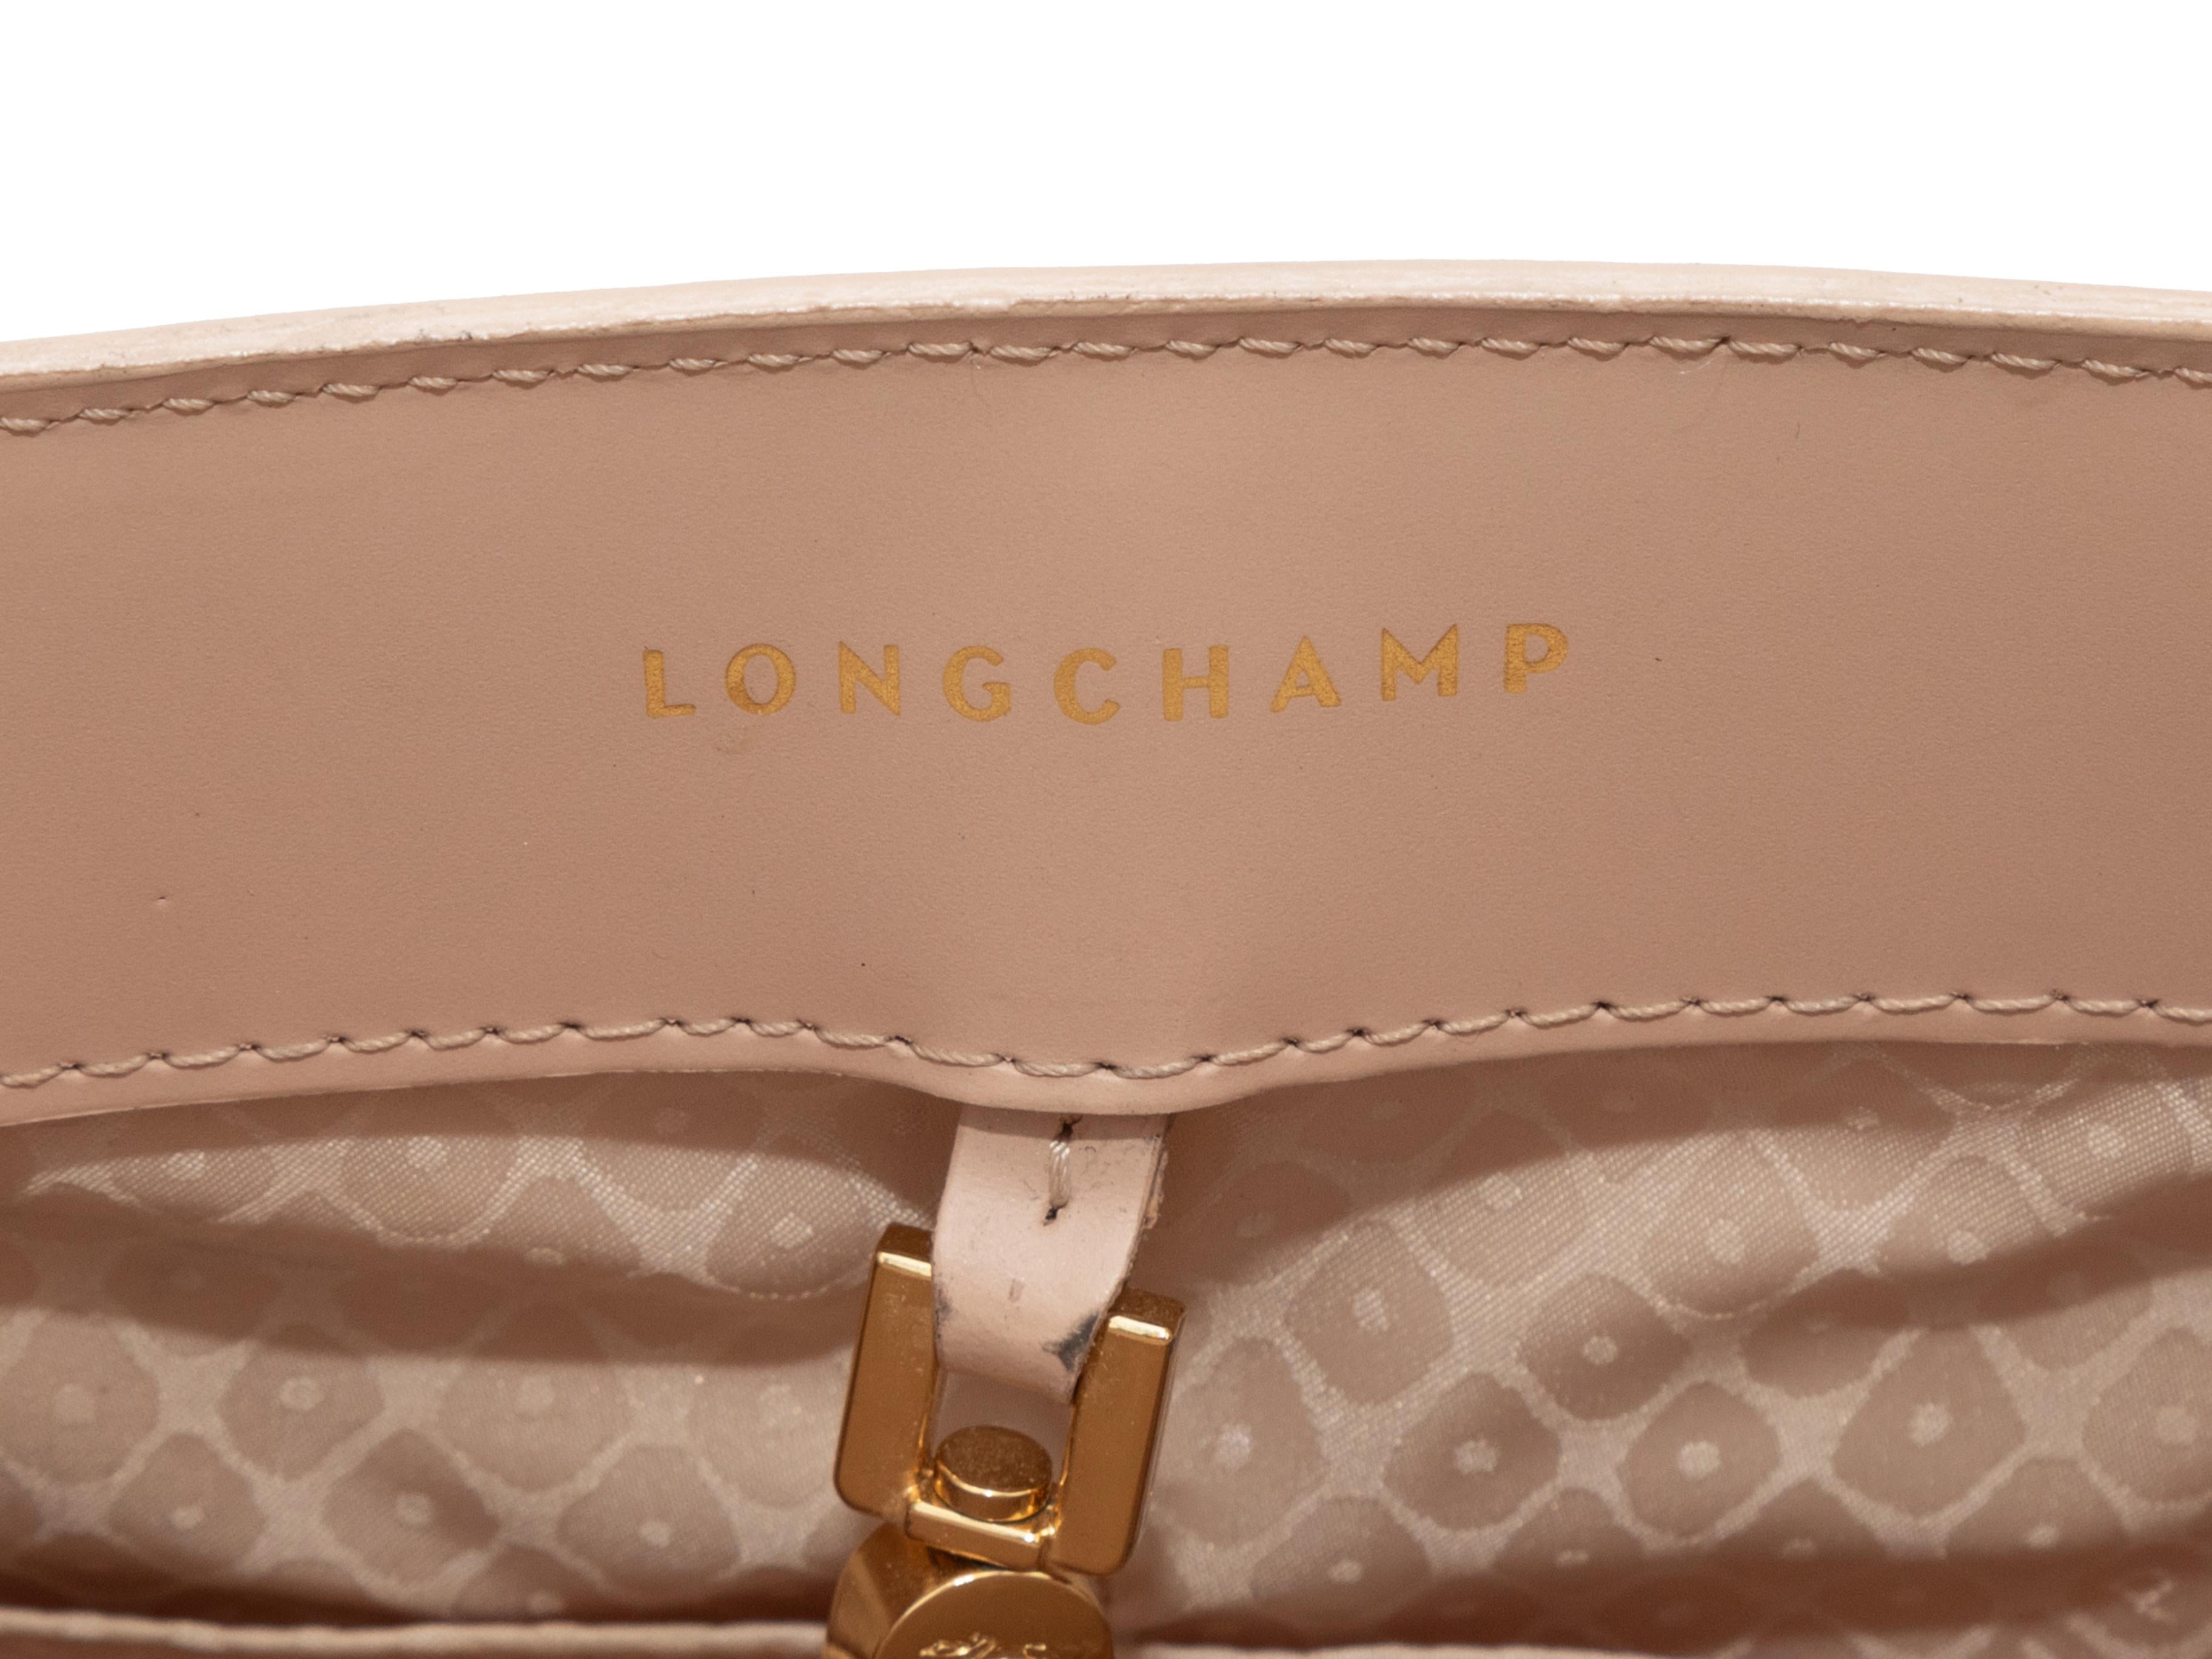 Blush Longchamp Leather Shoulder Bag. This bag features a leather body, gold-tone hardware, dual flat top handles, and a single flat shoulder strap. 12